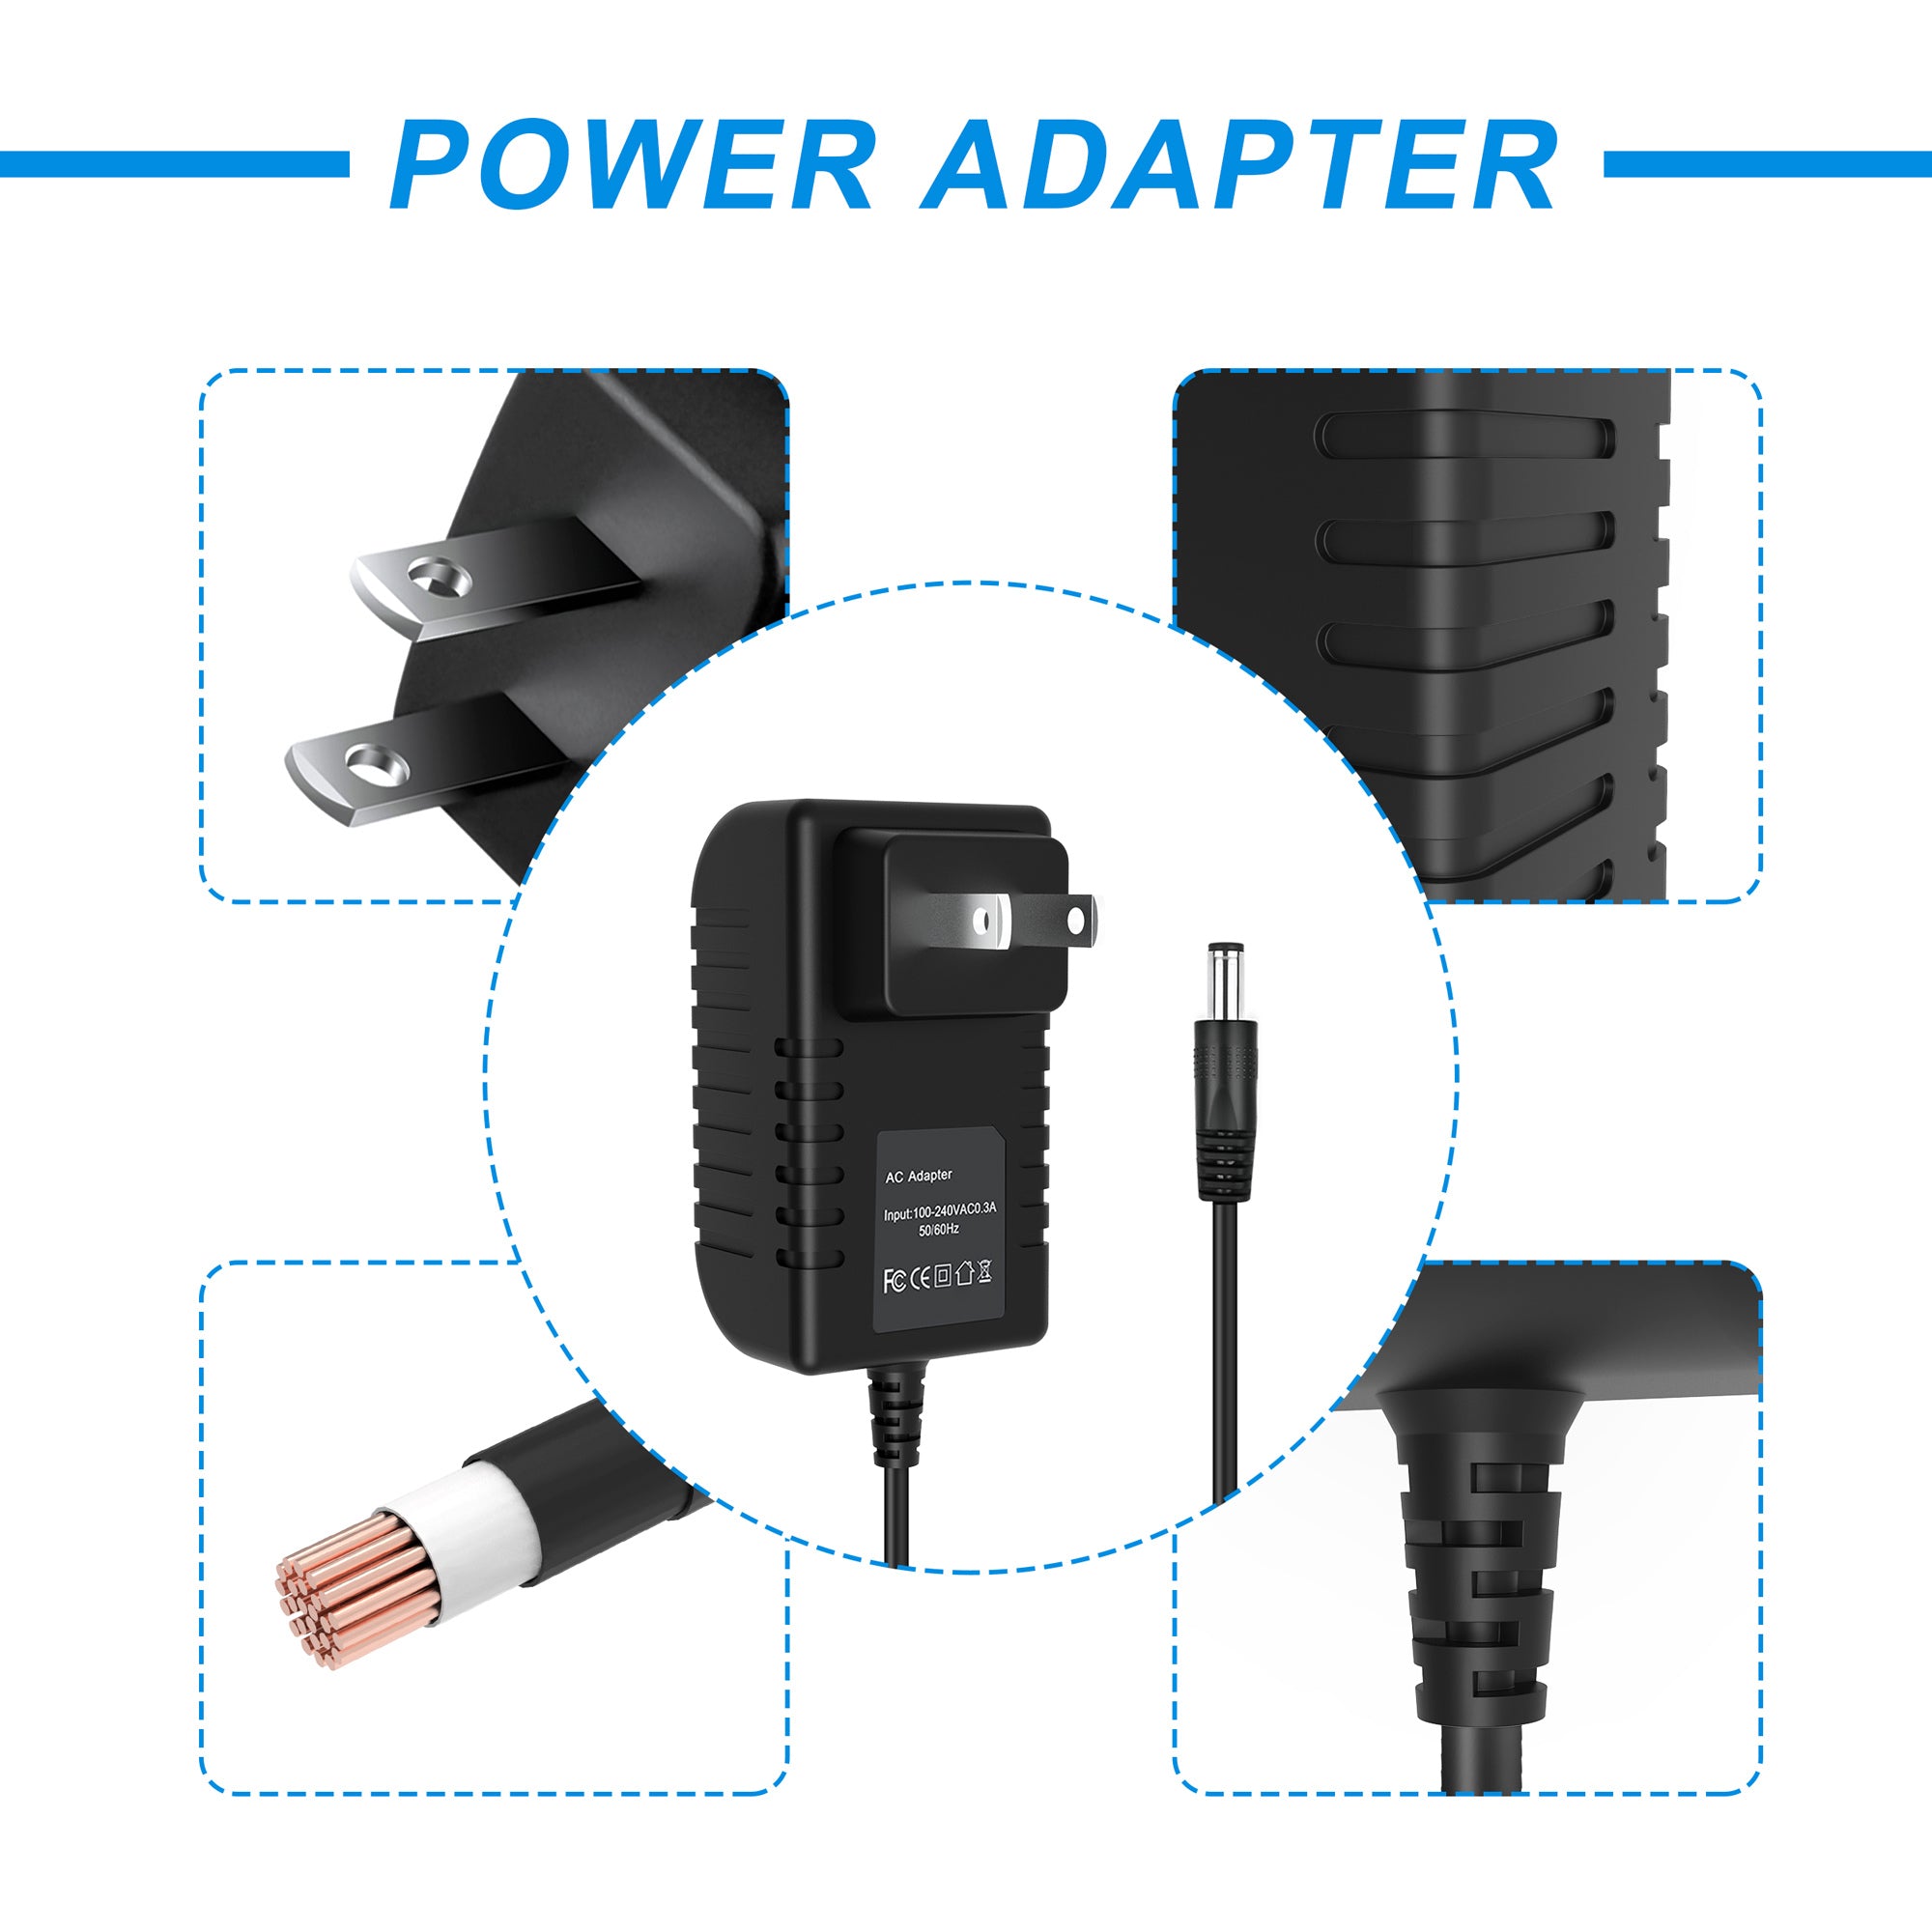 AbleGrid AC/DC Adapter Compatible with Model: AD150600550 Audio/Video AV Apparatus Power Supply Cord Cable Battery Charger Input: 100 - 240 VAC Worldwide Use Mains PSU